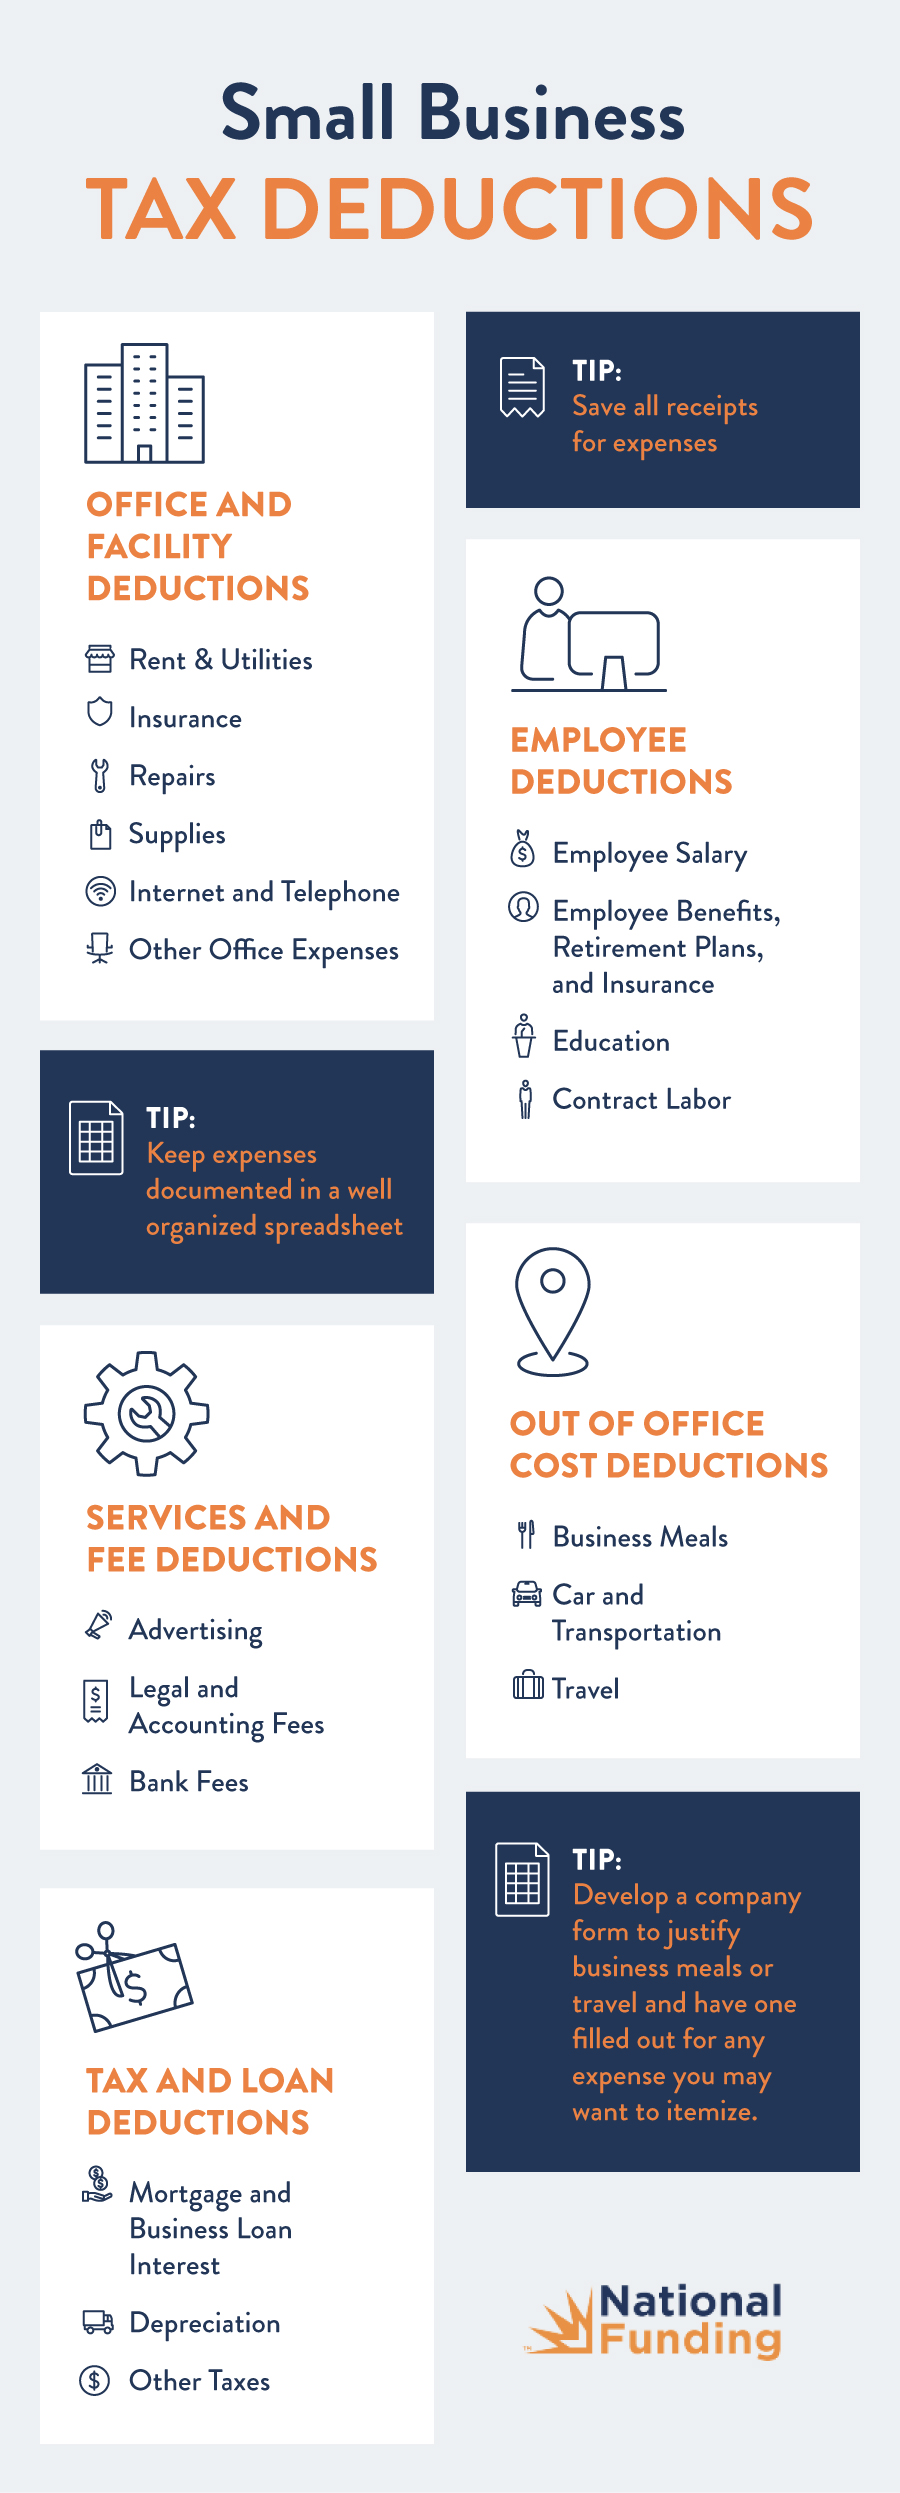 Small Business Tax Deductions Infographic